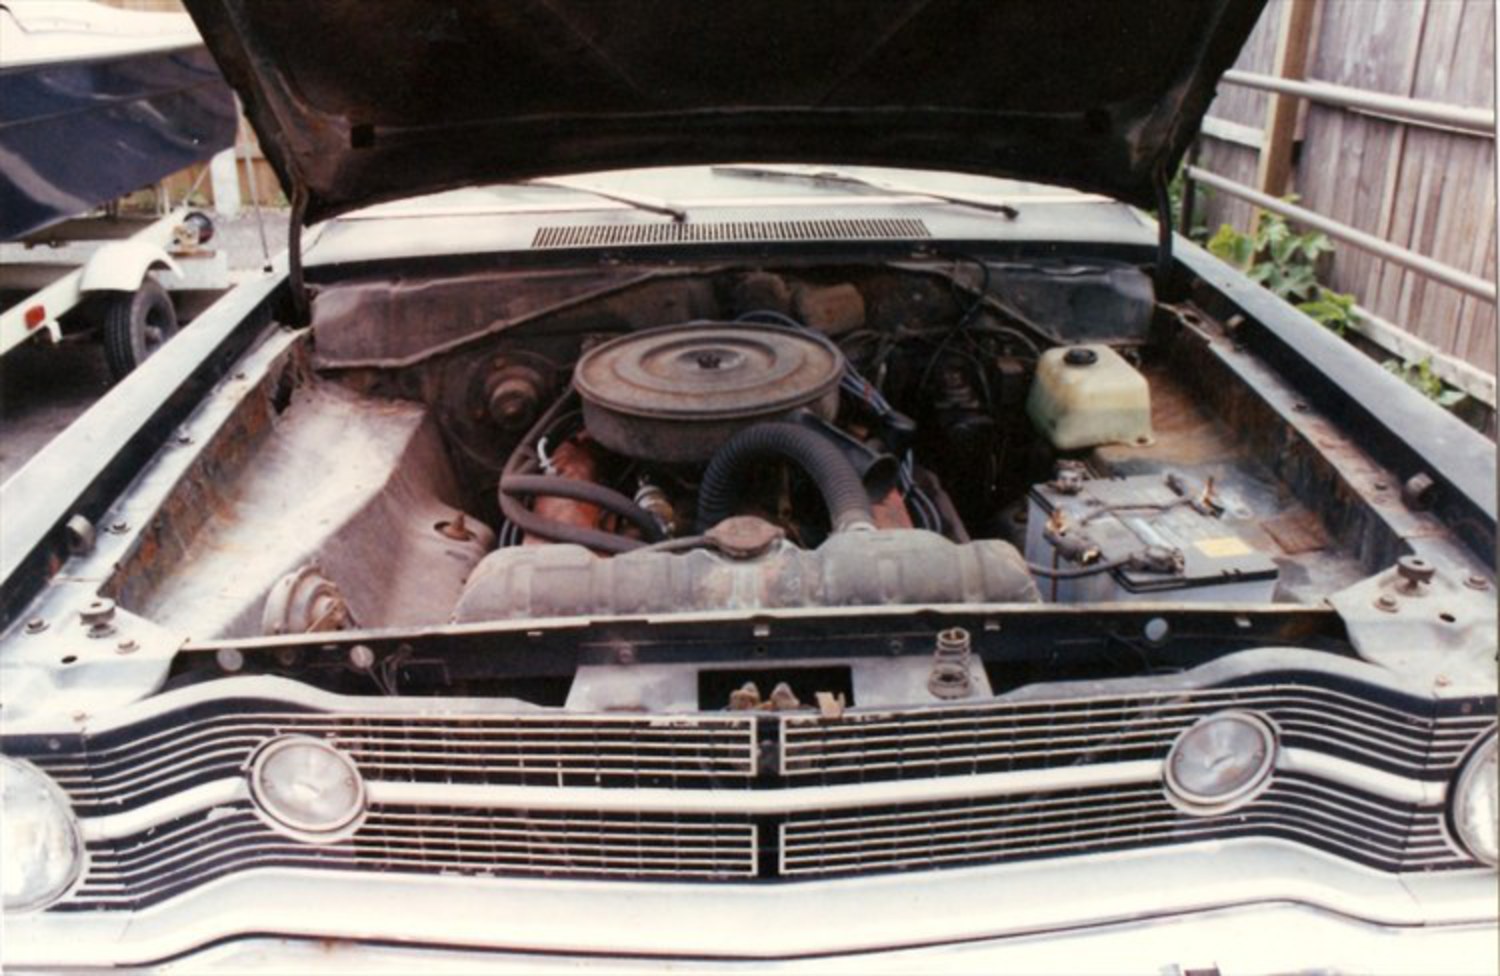 68 Dodge Dart 270 had a 273cu.in V8 2bbl with A904 Torqueflite, ran great